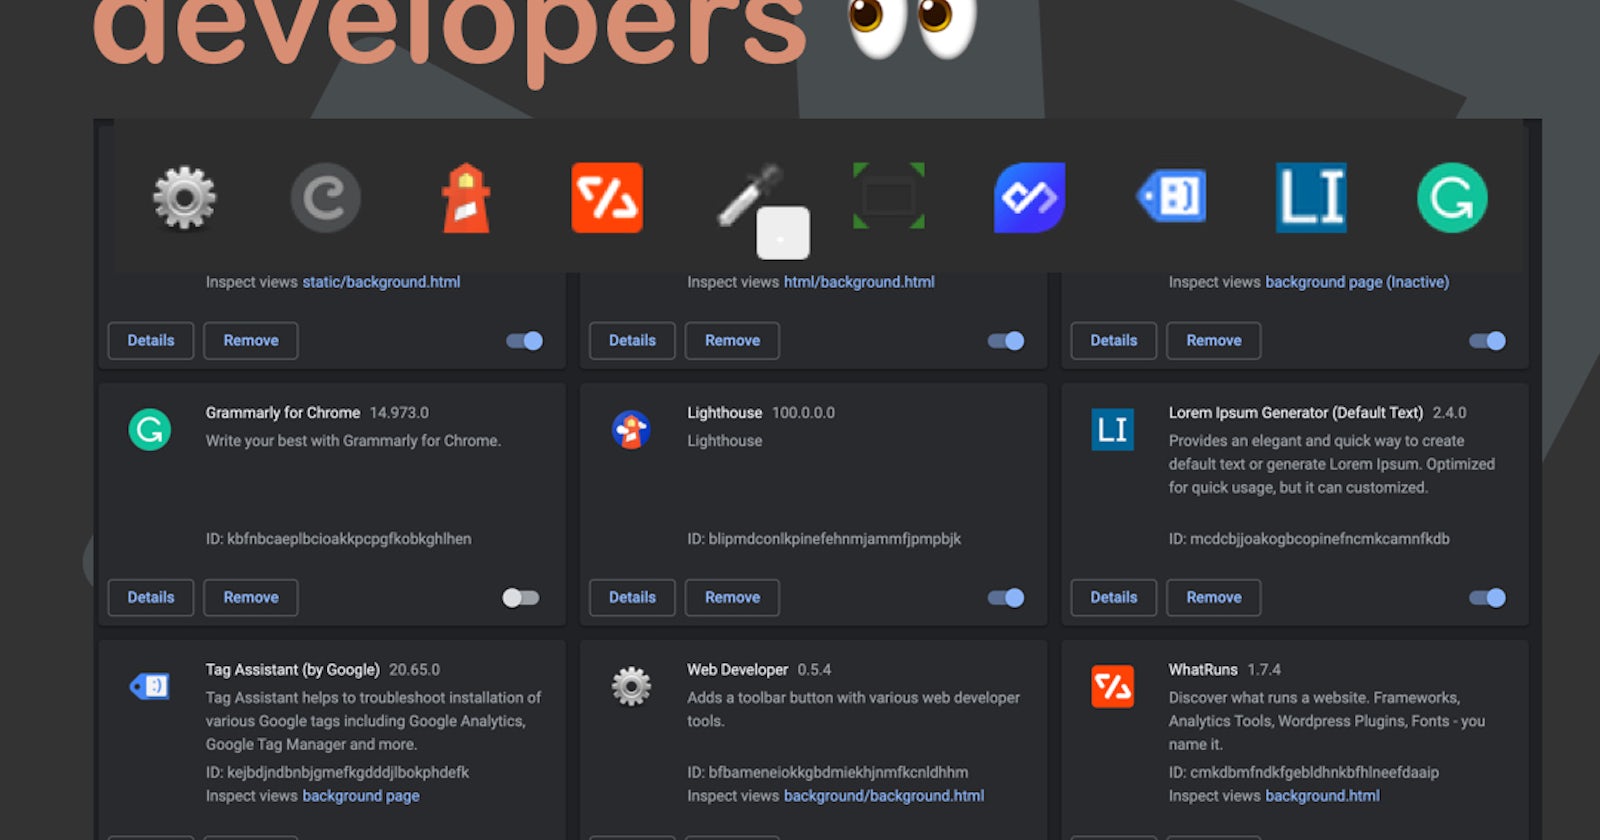 Top 10 Chrome extensions for developers 👀